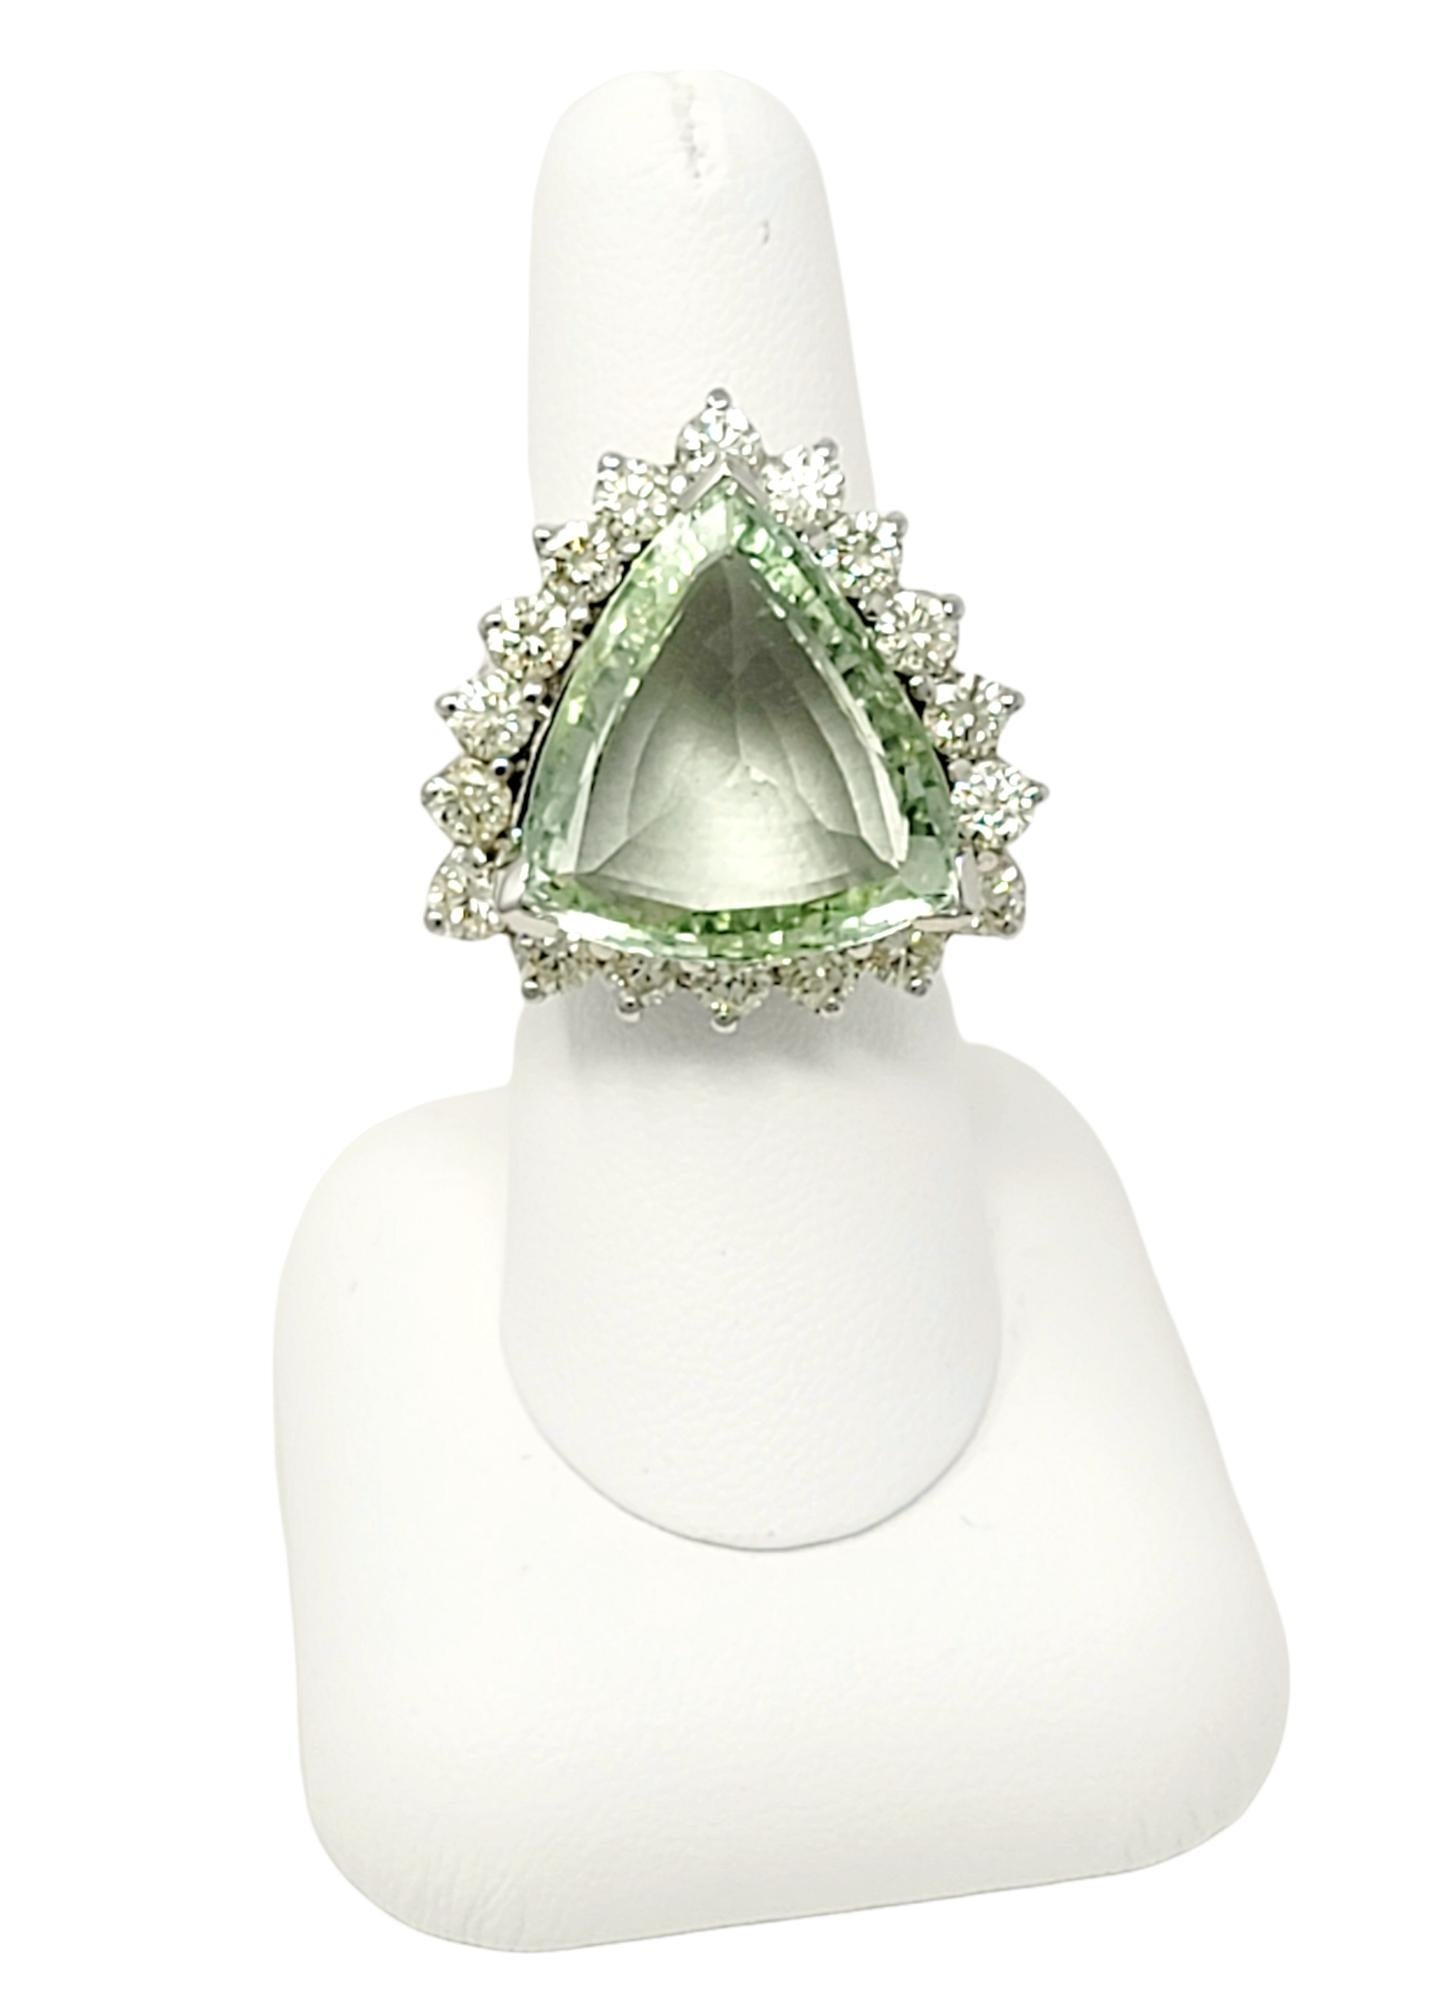 Large Triangular Mixed Cut Green Beryl and Diamond Halo Statement Cocktail Ring  For Sale 6